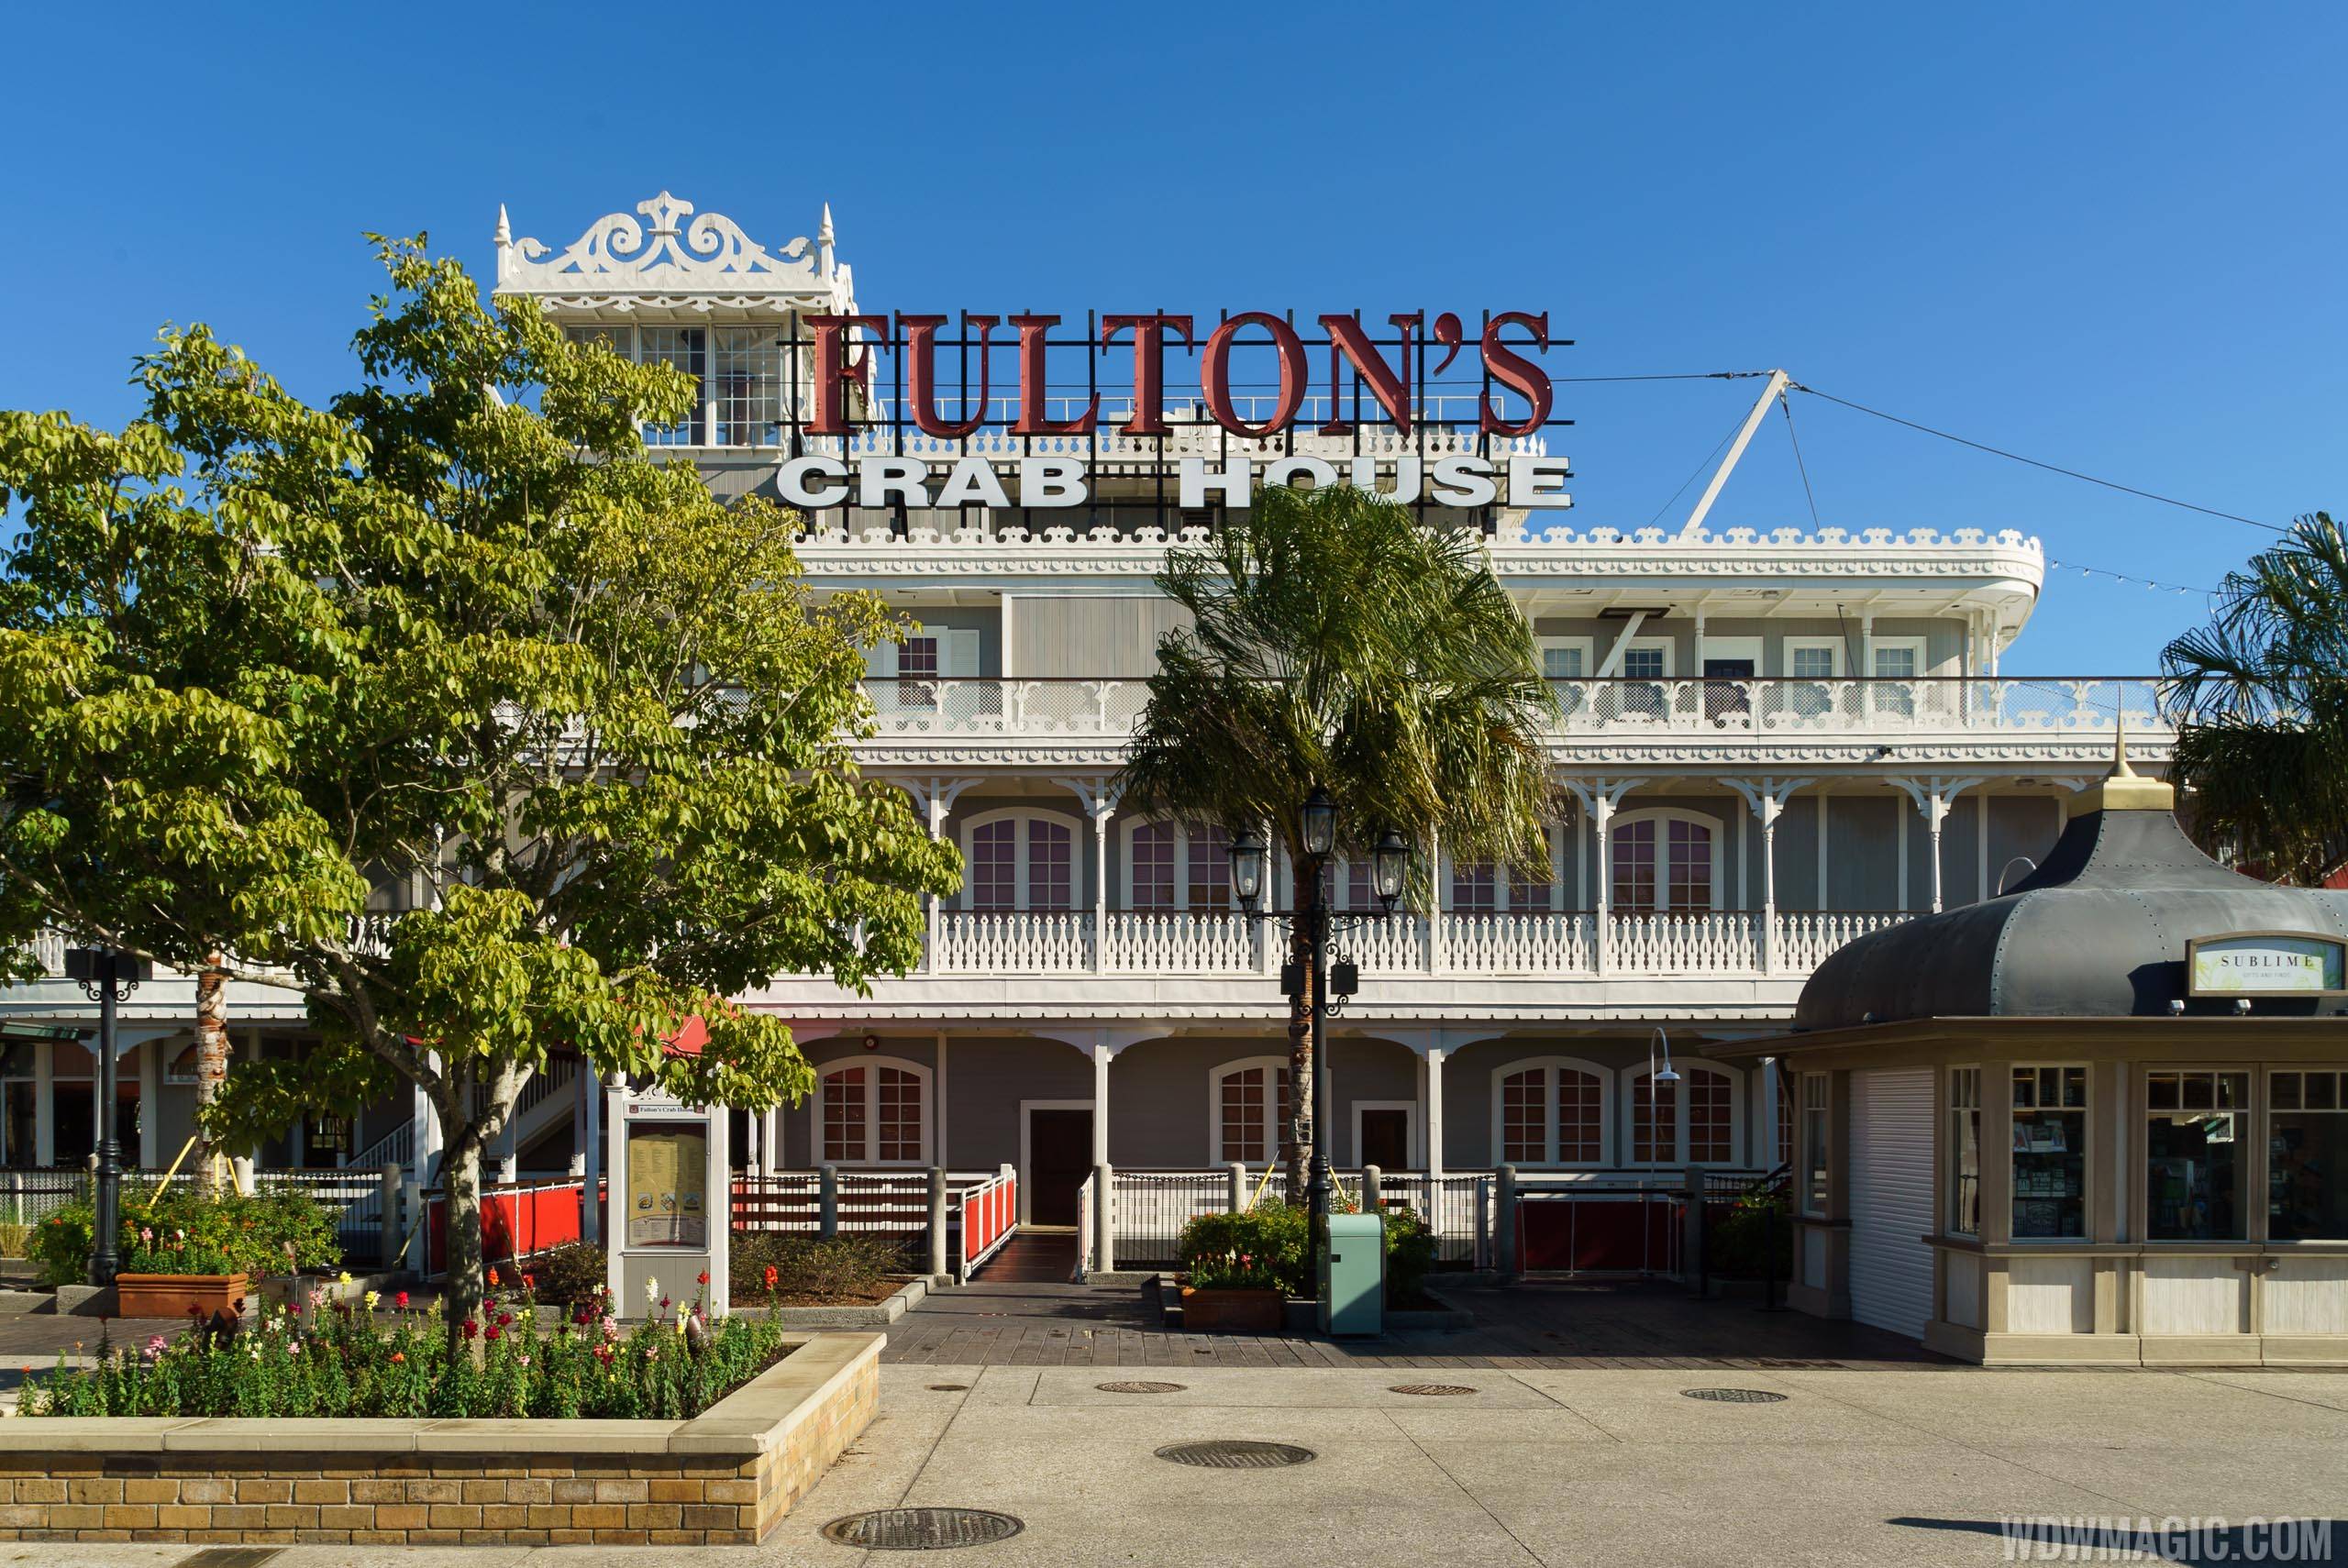 Fulton's Crab House lobby and dining room makeover